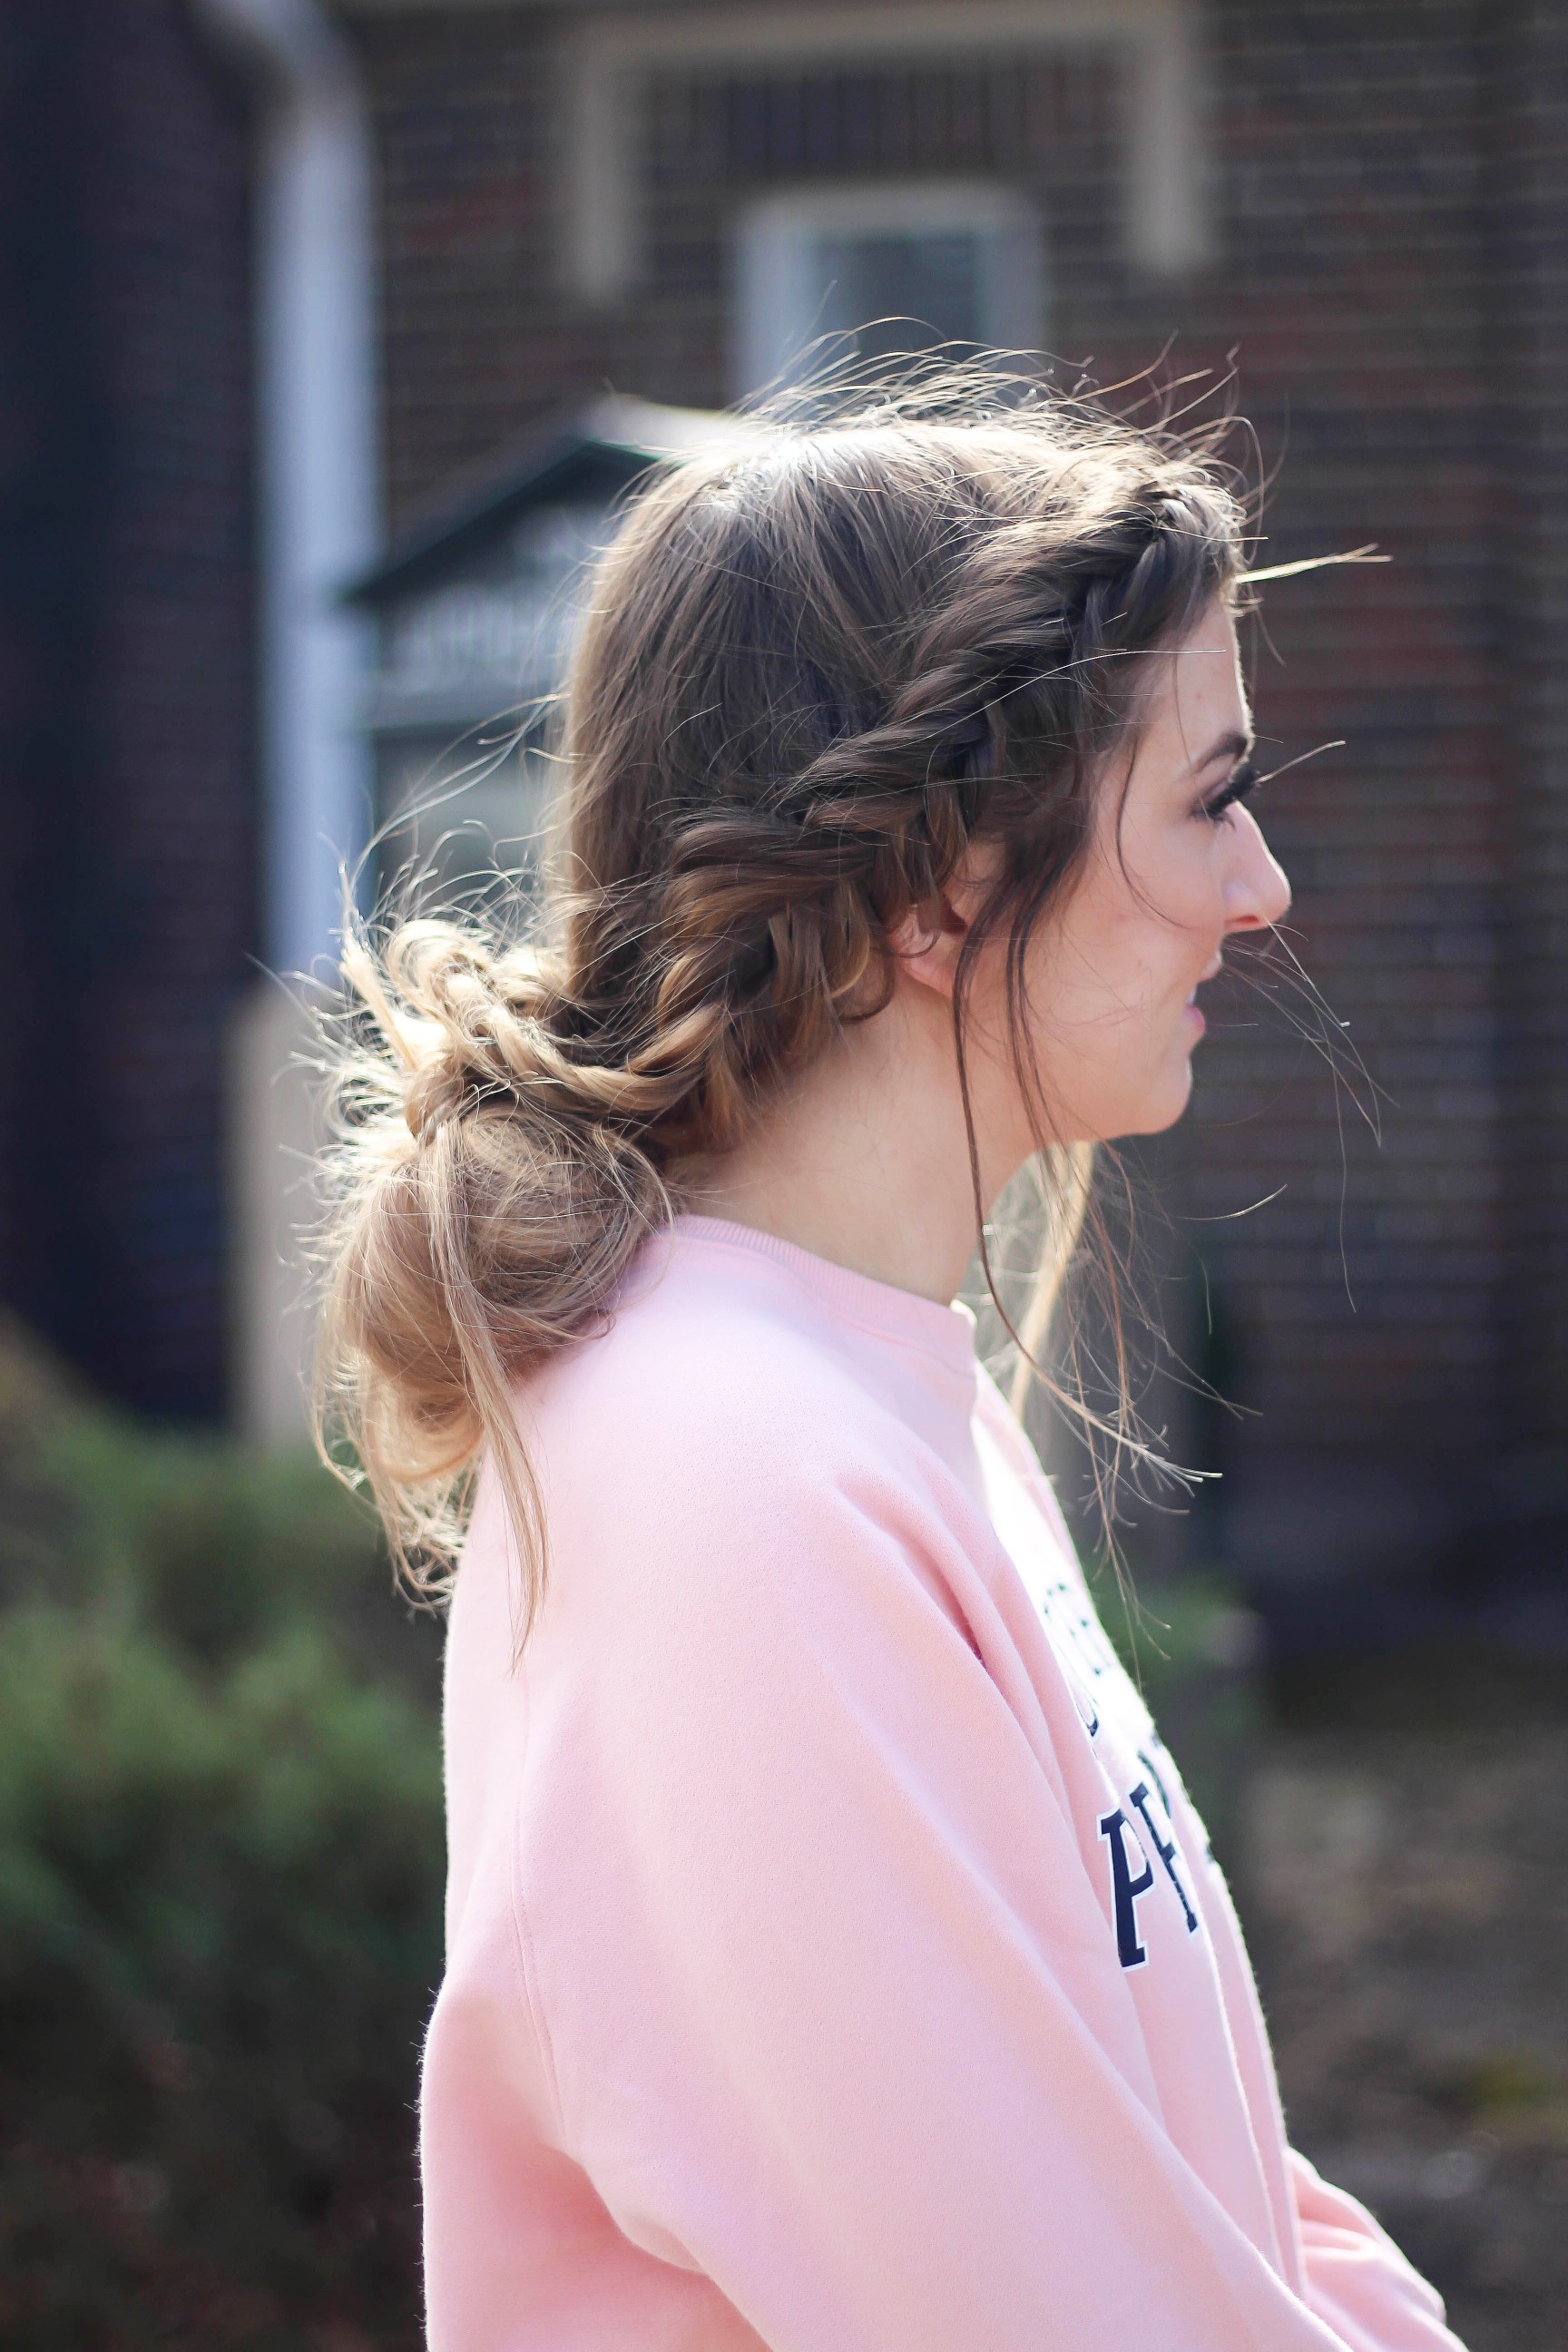 Valentine's Day Hairstyles! Perfect hairstyles for Valentine's Day that are easy and no heat. I love finding cute hairstyles that are no heat hairstyles and easy to do! By Lauren Lindmark on Daily Dose of Charm dailydoseofcharm.com